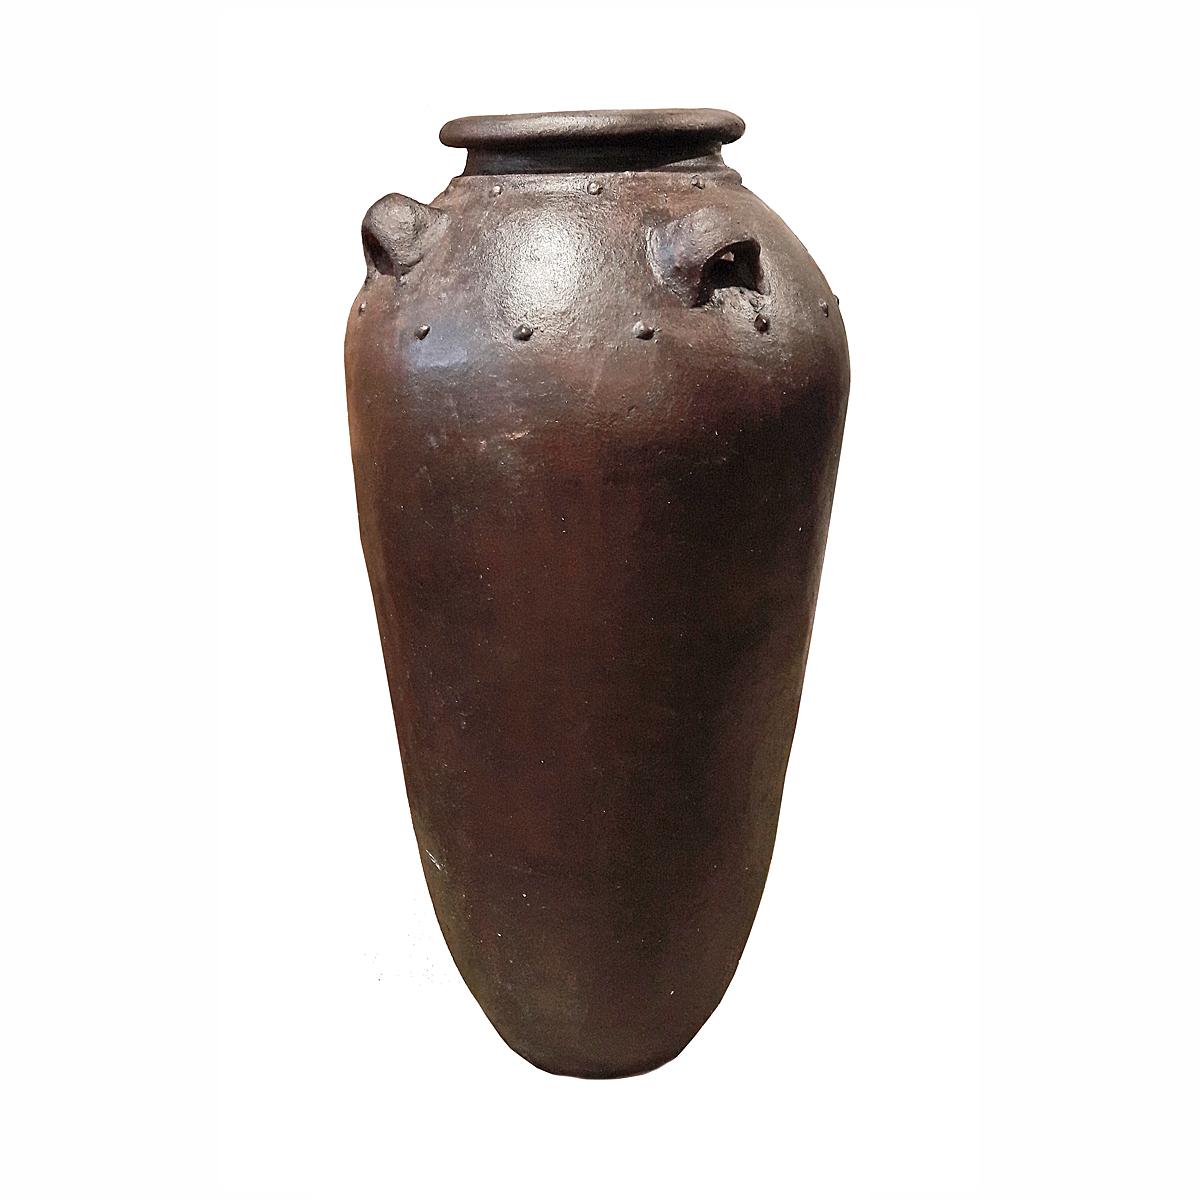 A tall clay jar or amphora, handcrafted in Indonesia, contemporary. Rustic finish in brown glaze. 4 ears. Can be used as a decorative element indoors, or as a planter or cachepot in outdoor spaces. 

Two available.